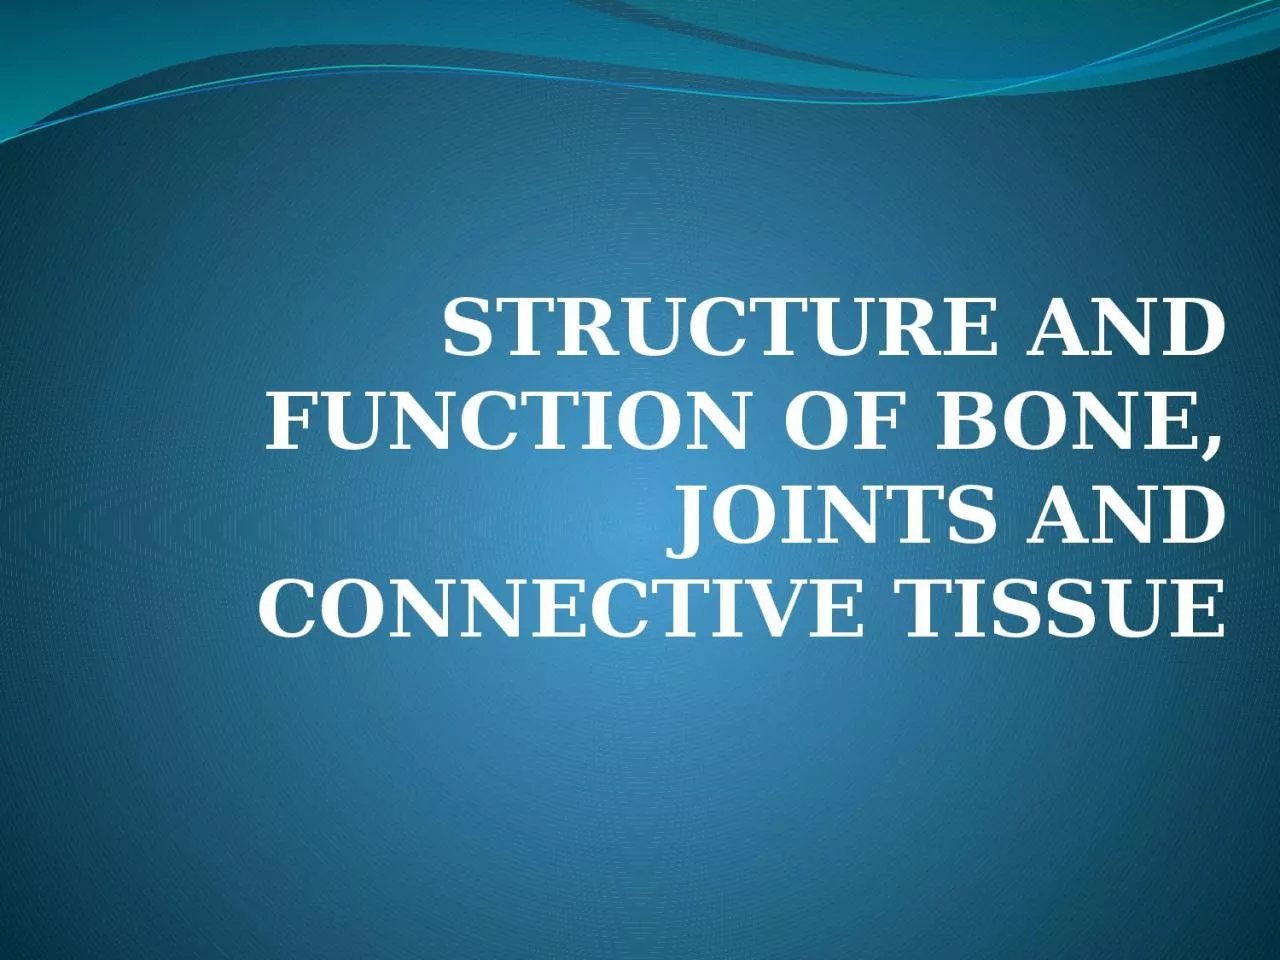 STRUCTURE AND FUNCTION OF BONE, JOINTS AND CONNECTIVE TISSUE